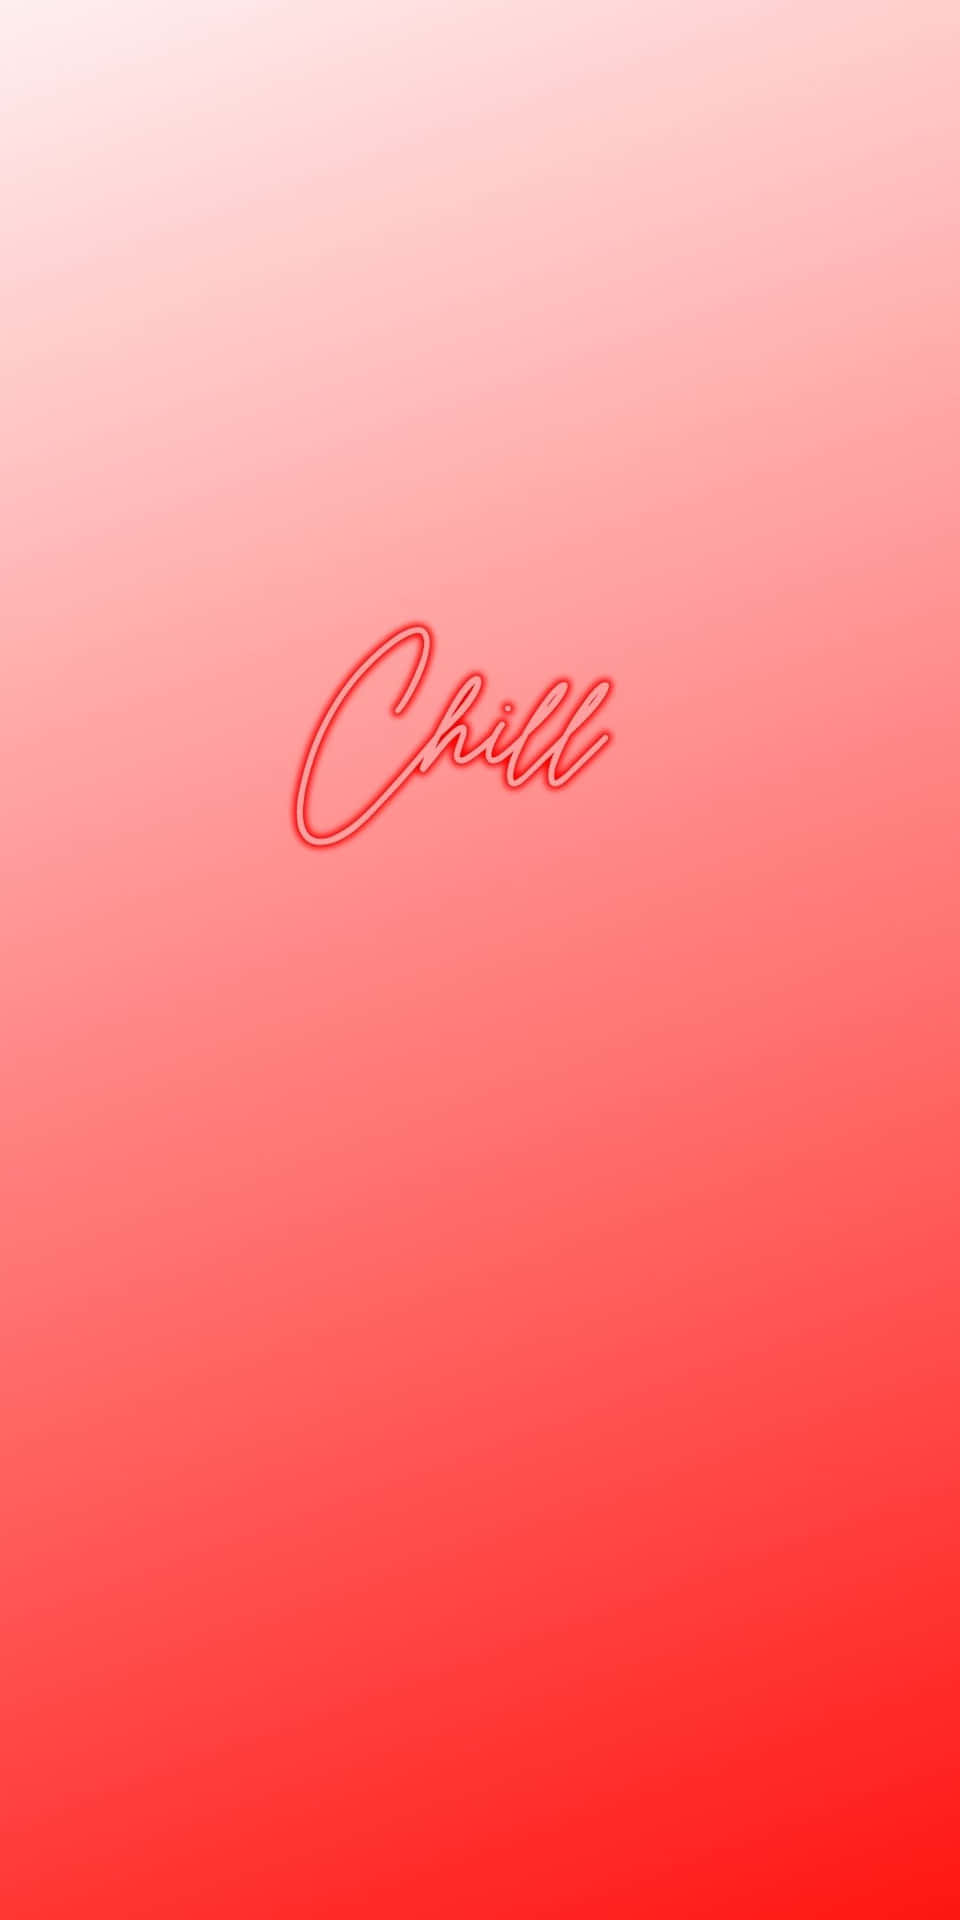 Chill Typography Red Gradient Background